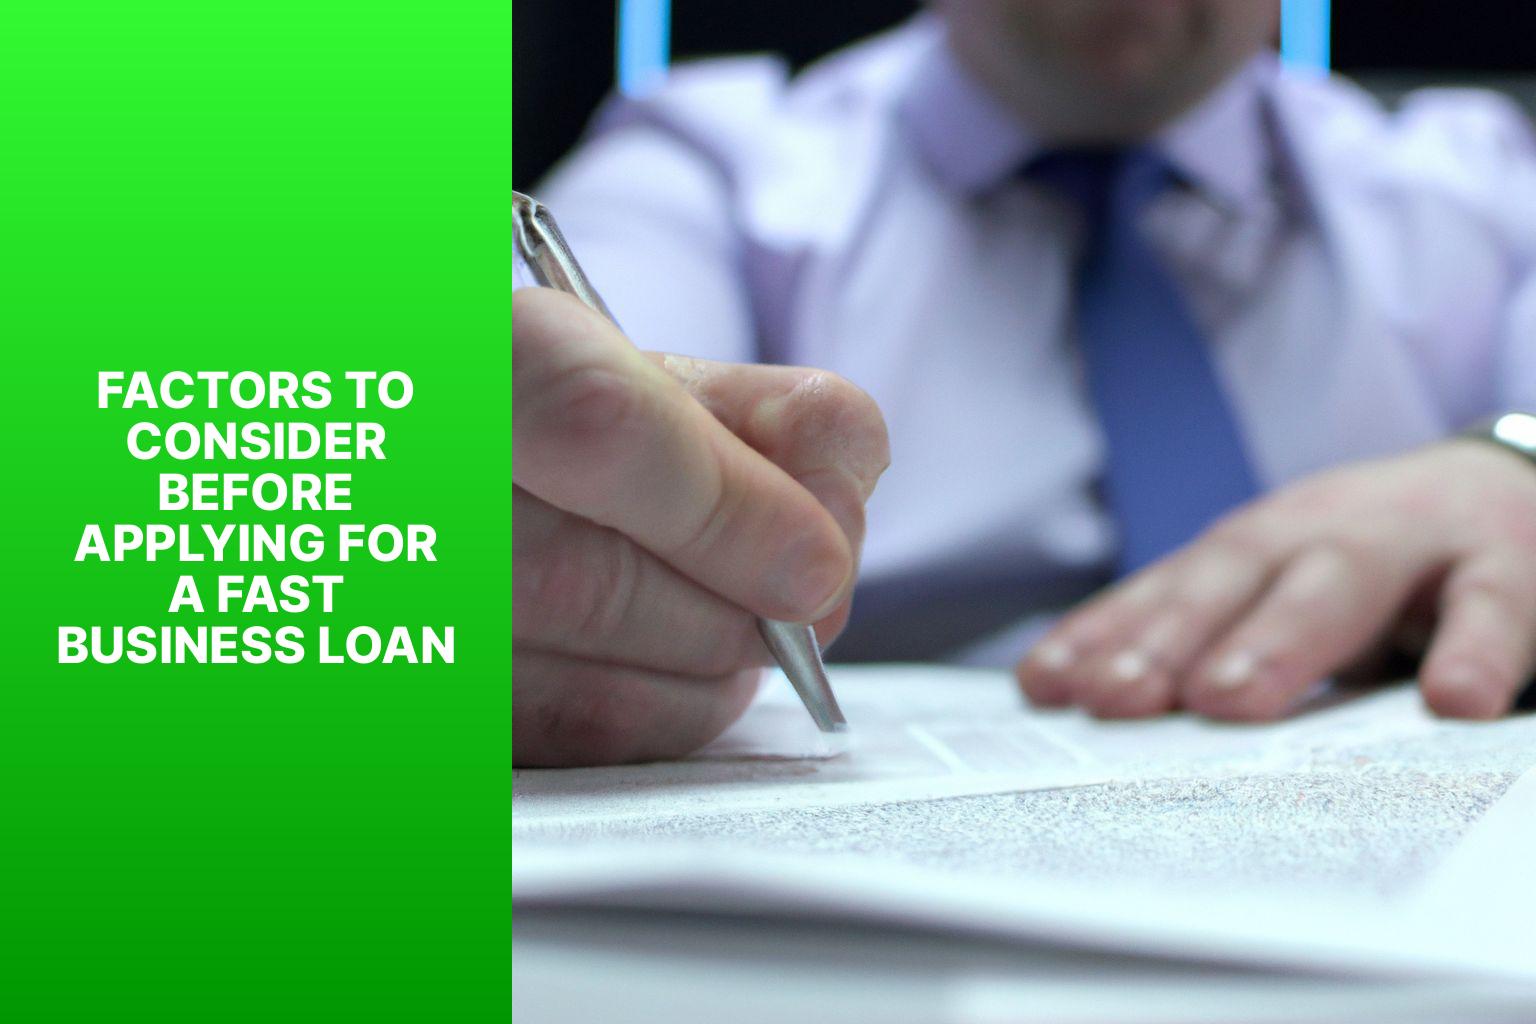 Factors to Consider Before Applying for a Fast Business Loan - Speedy Solutions: A Look at the Best Fast Business Loans 